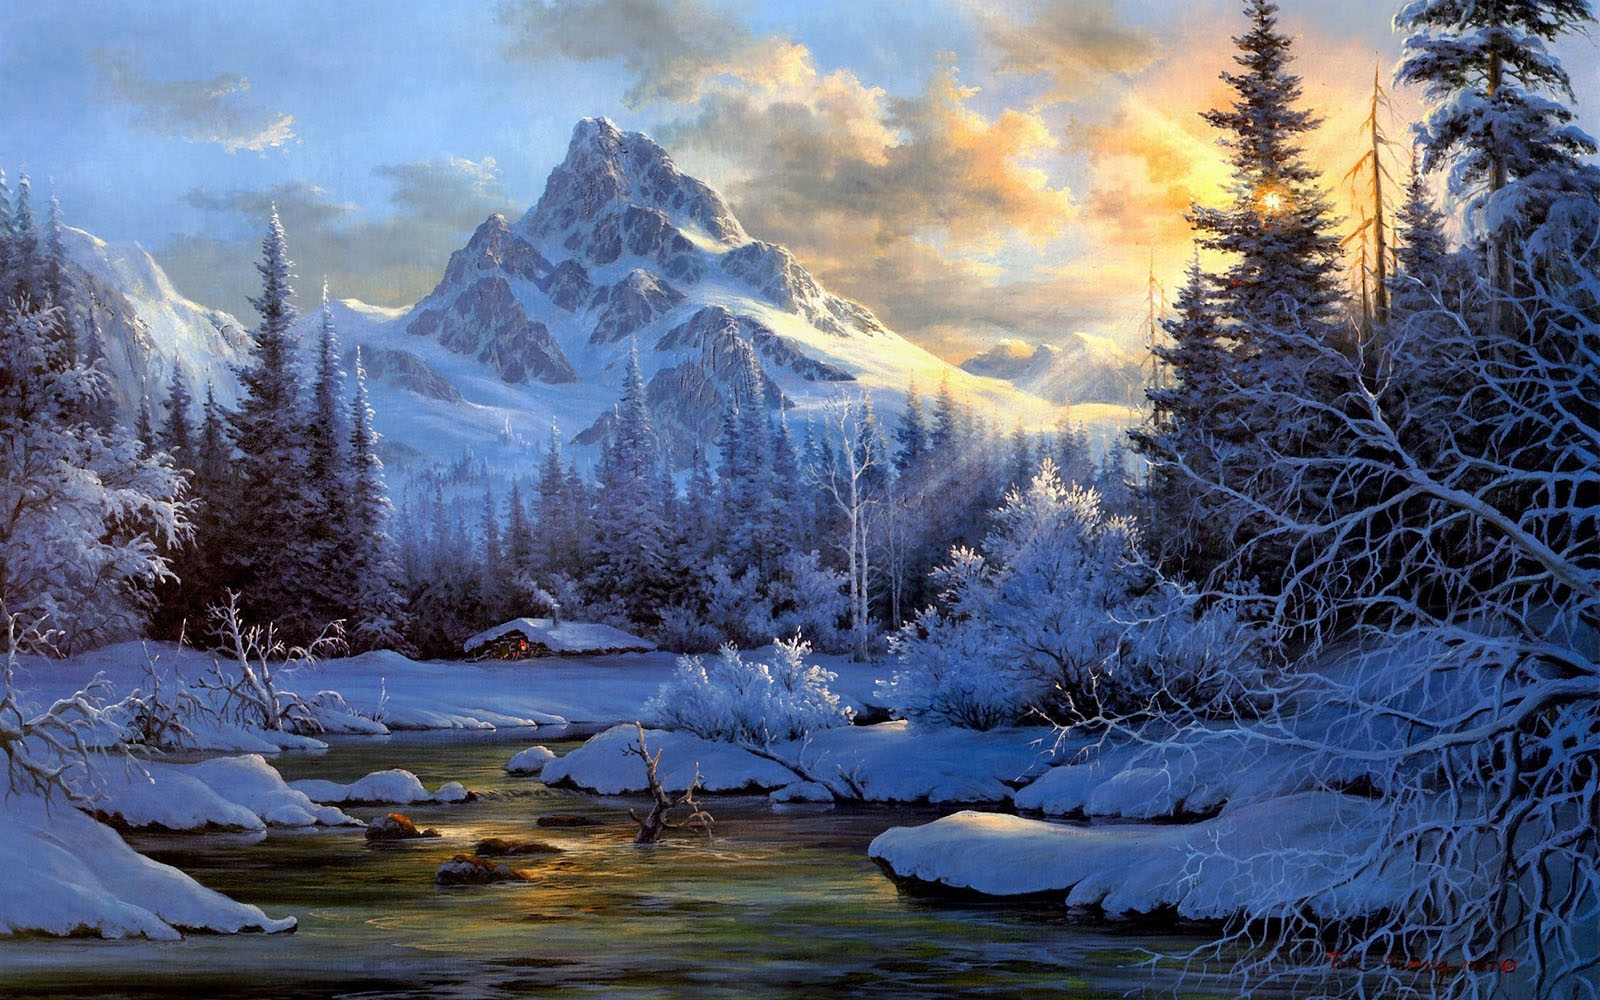 Snowy Mountain Backgrounds image gallery